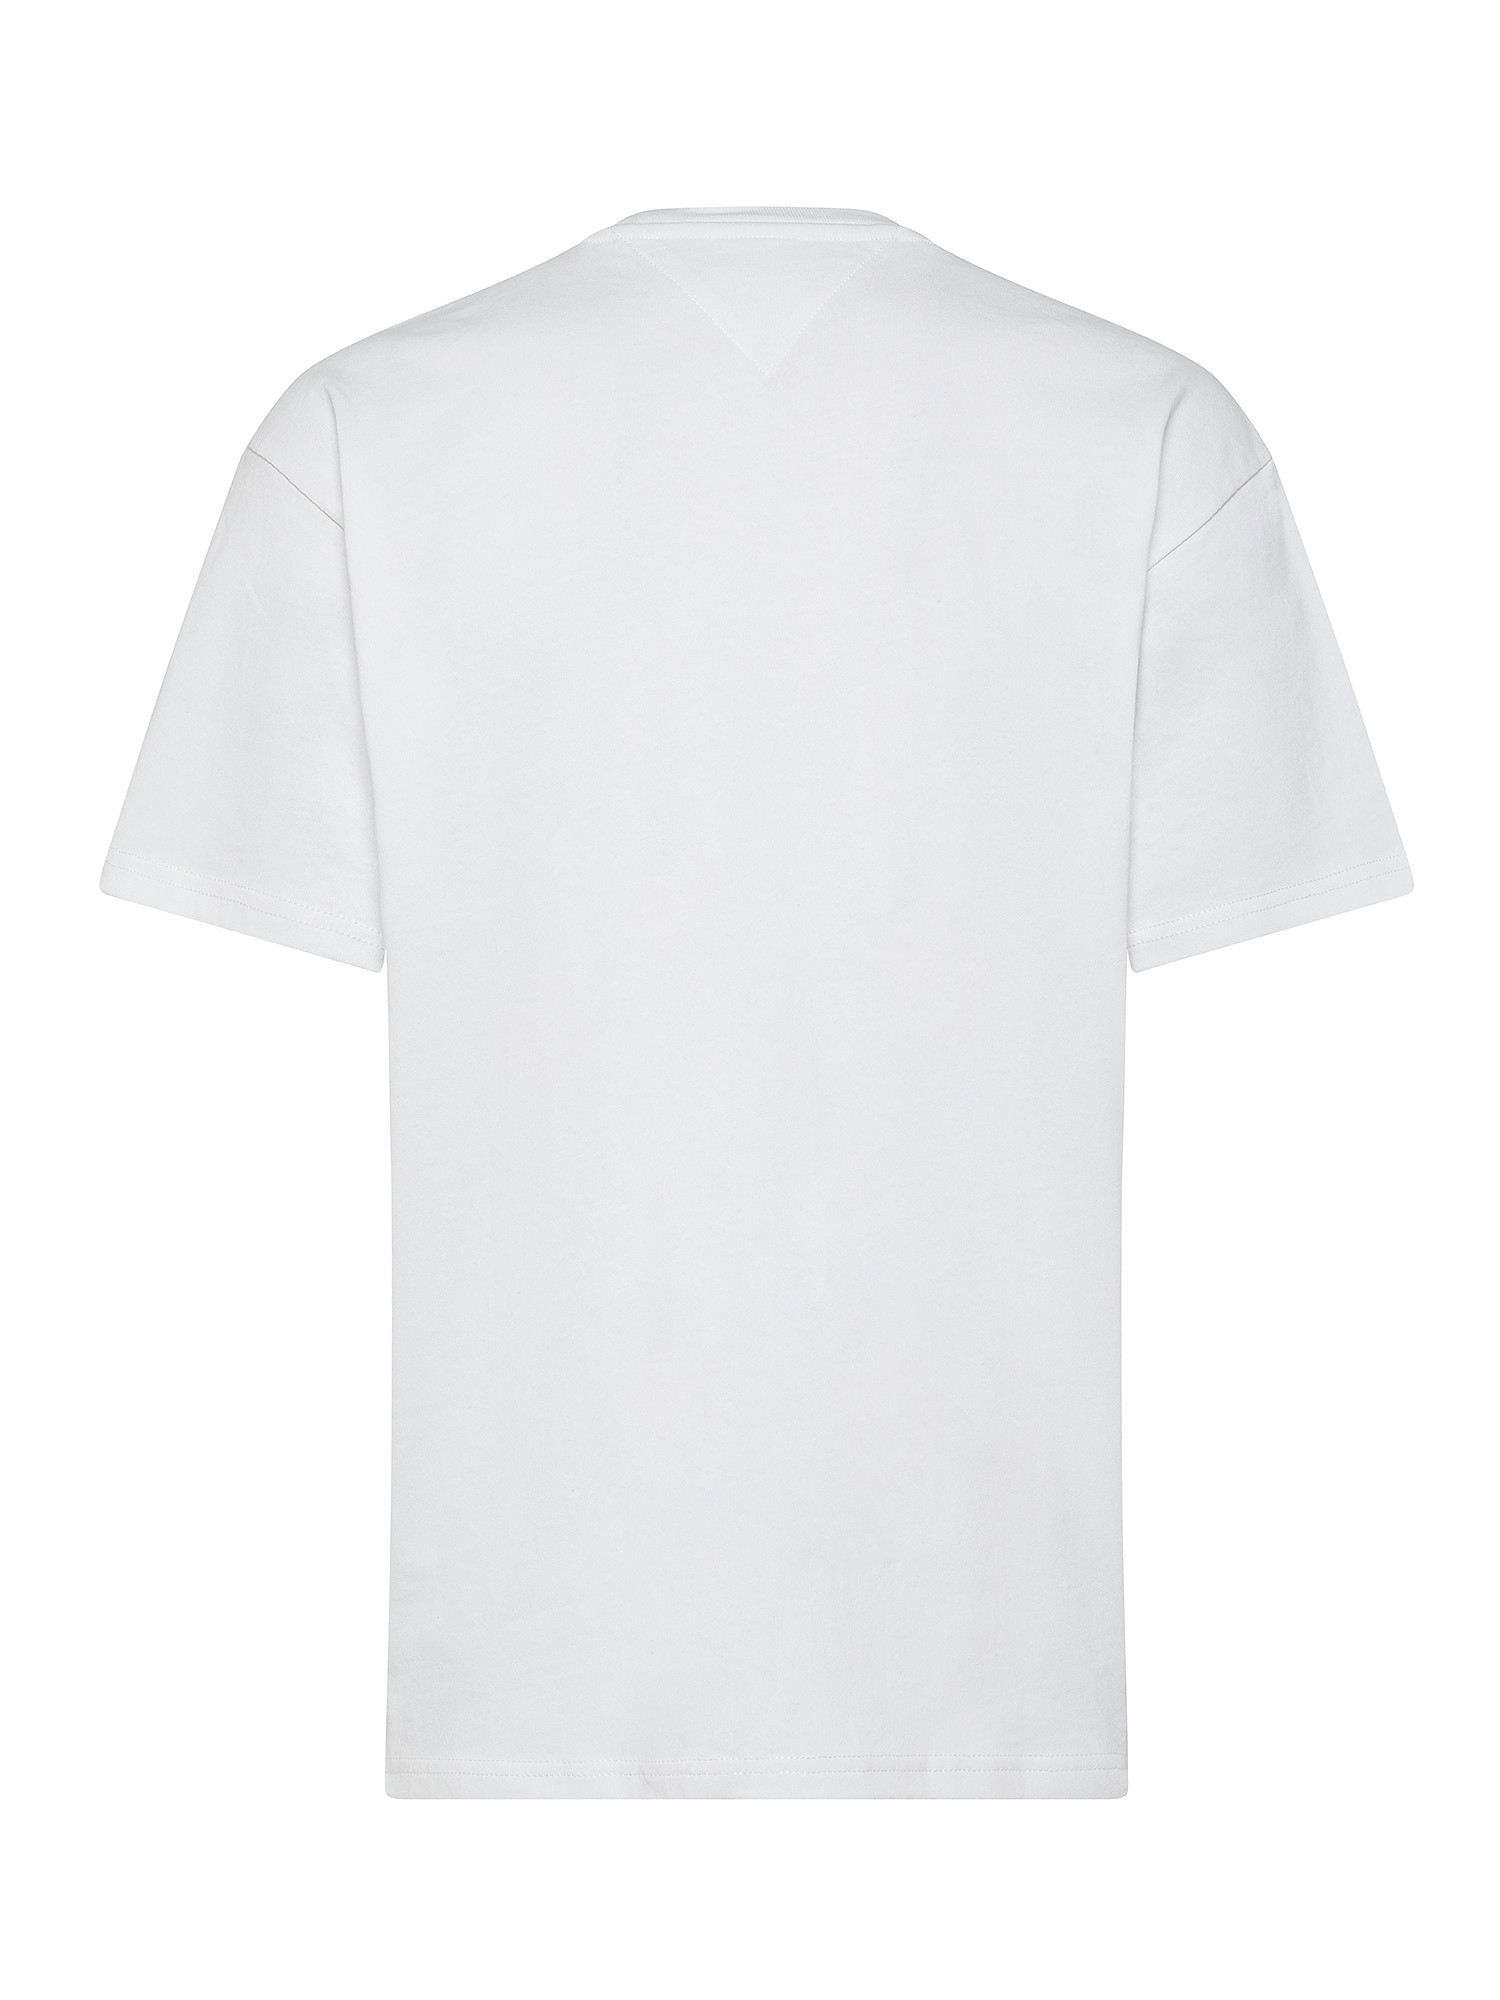 Tommy Jeans - Crew neck cotton T-shirt with print and logo, White, large image number 1